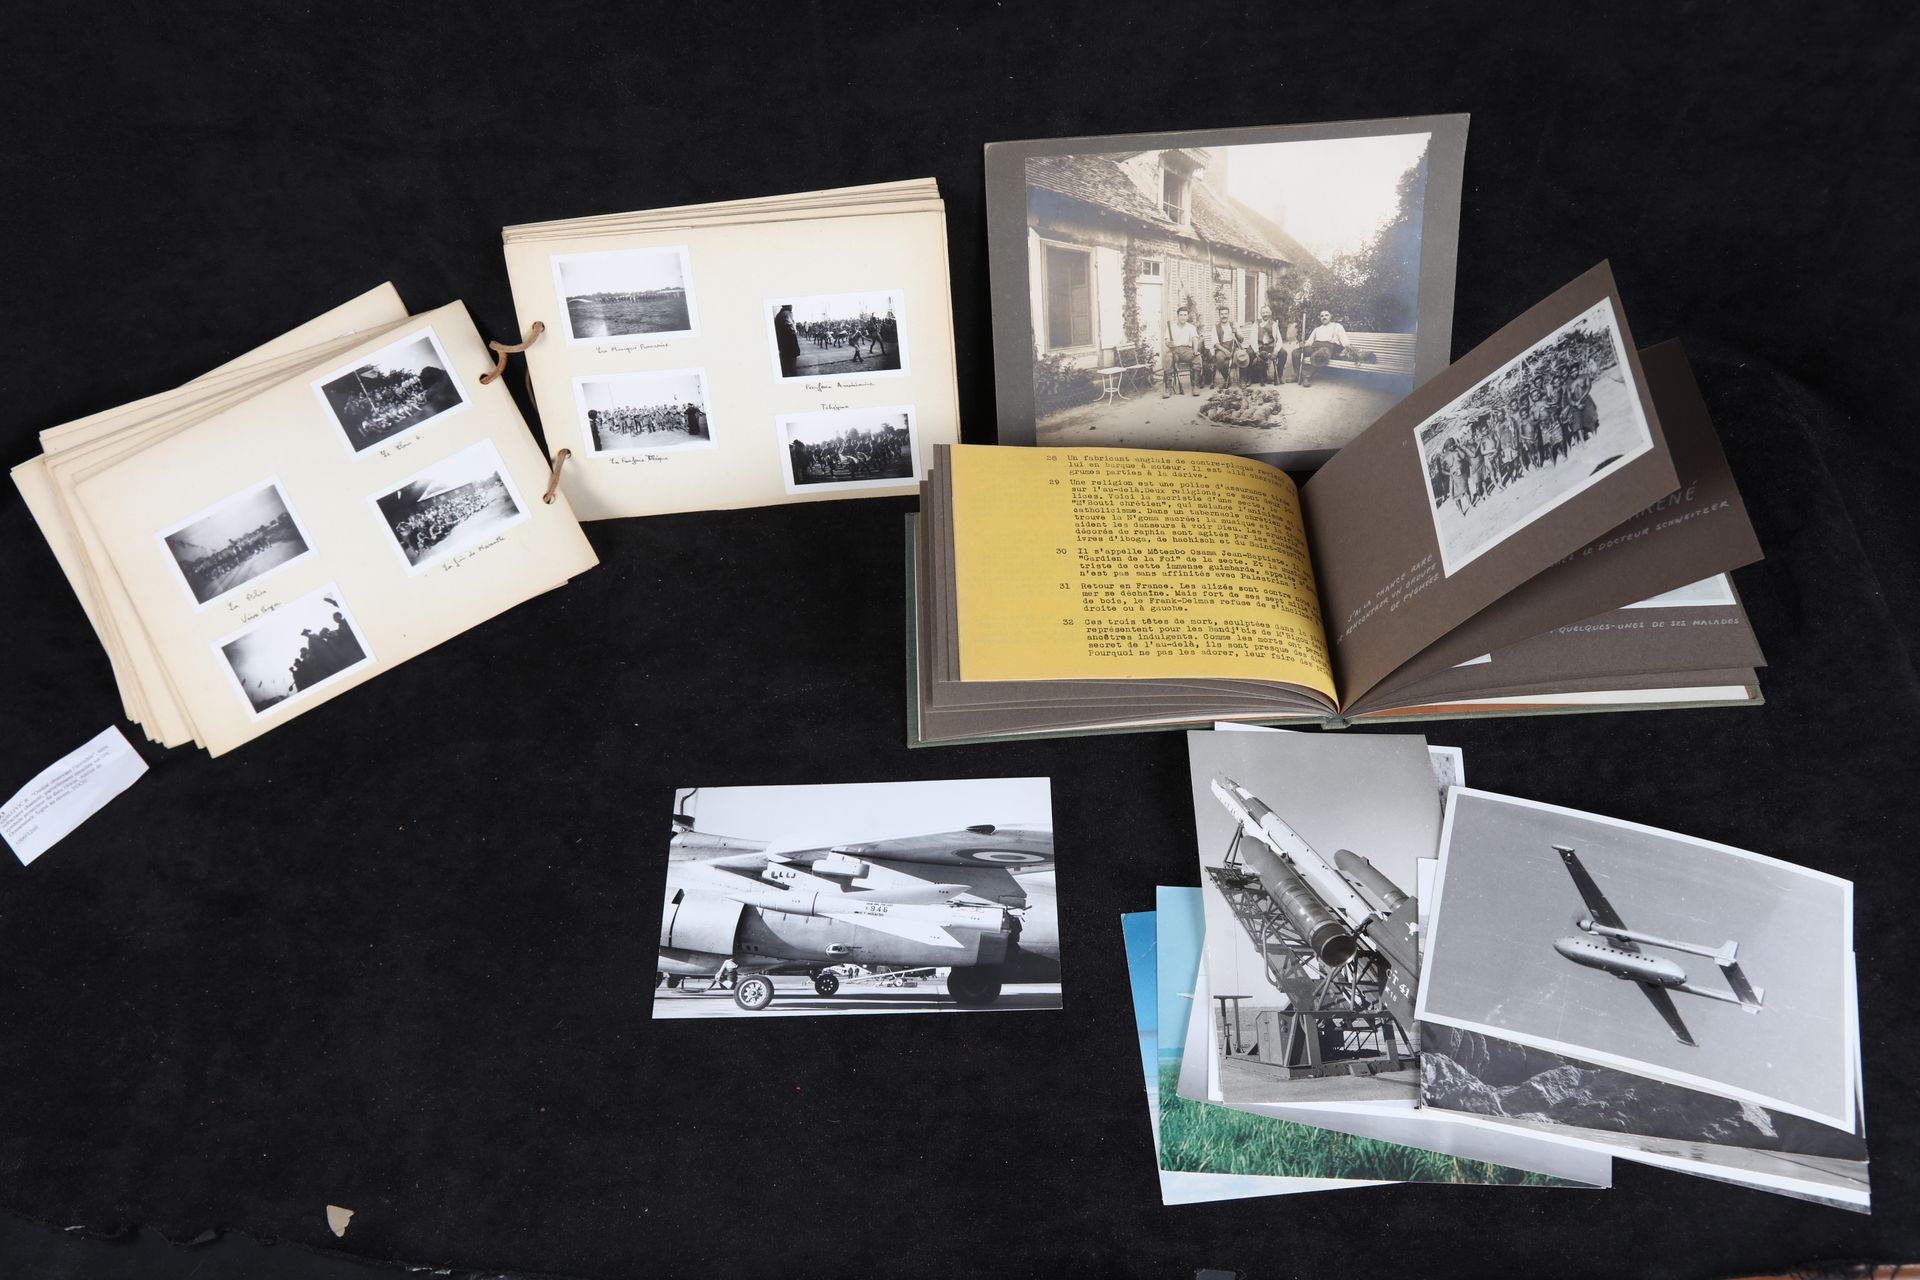 Null 
Lot of period photographs on aviation. We join there: a "Album of voyage",&hellip;